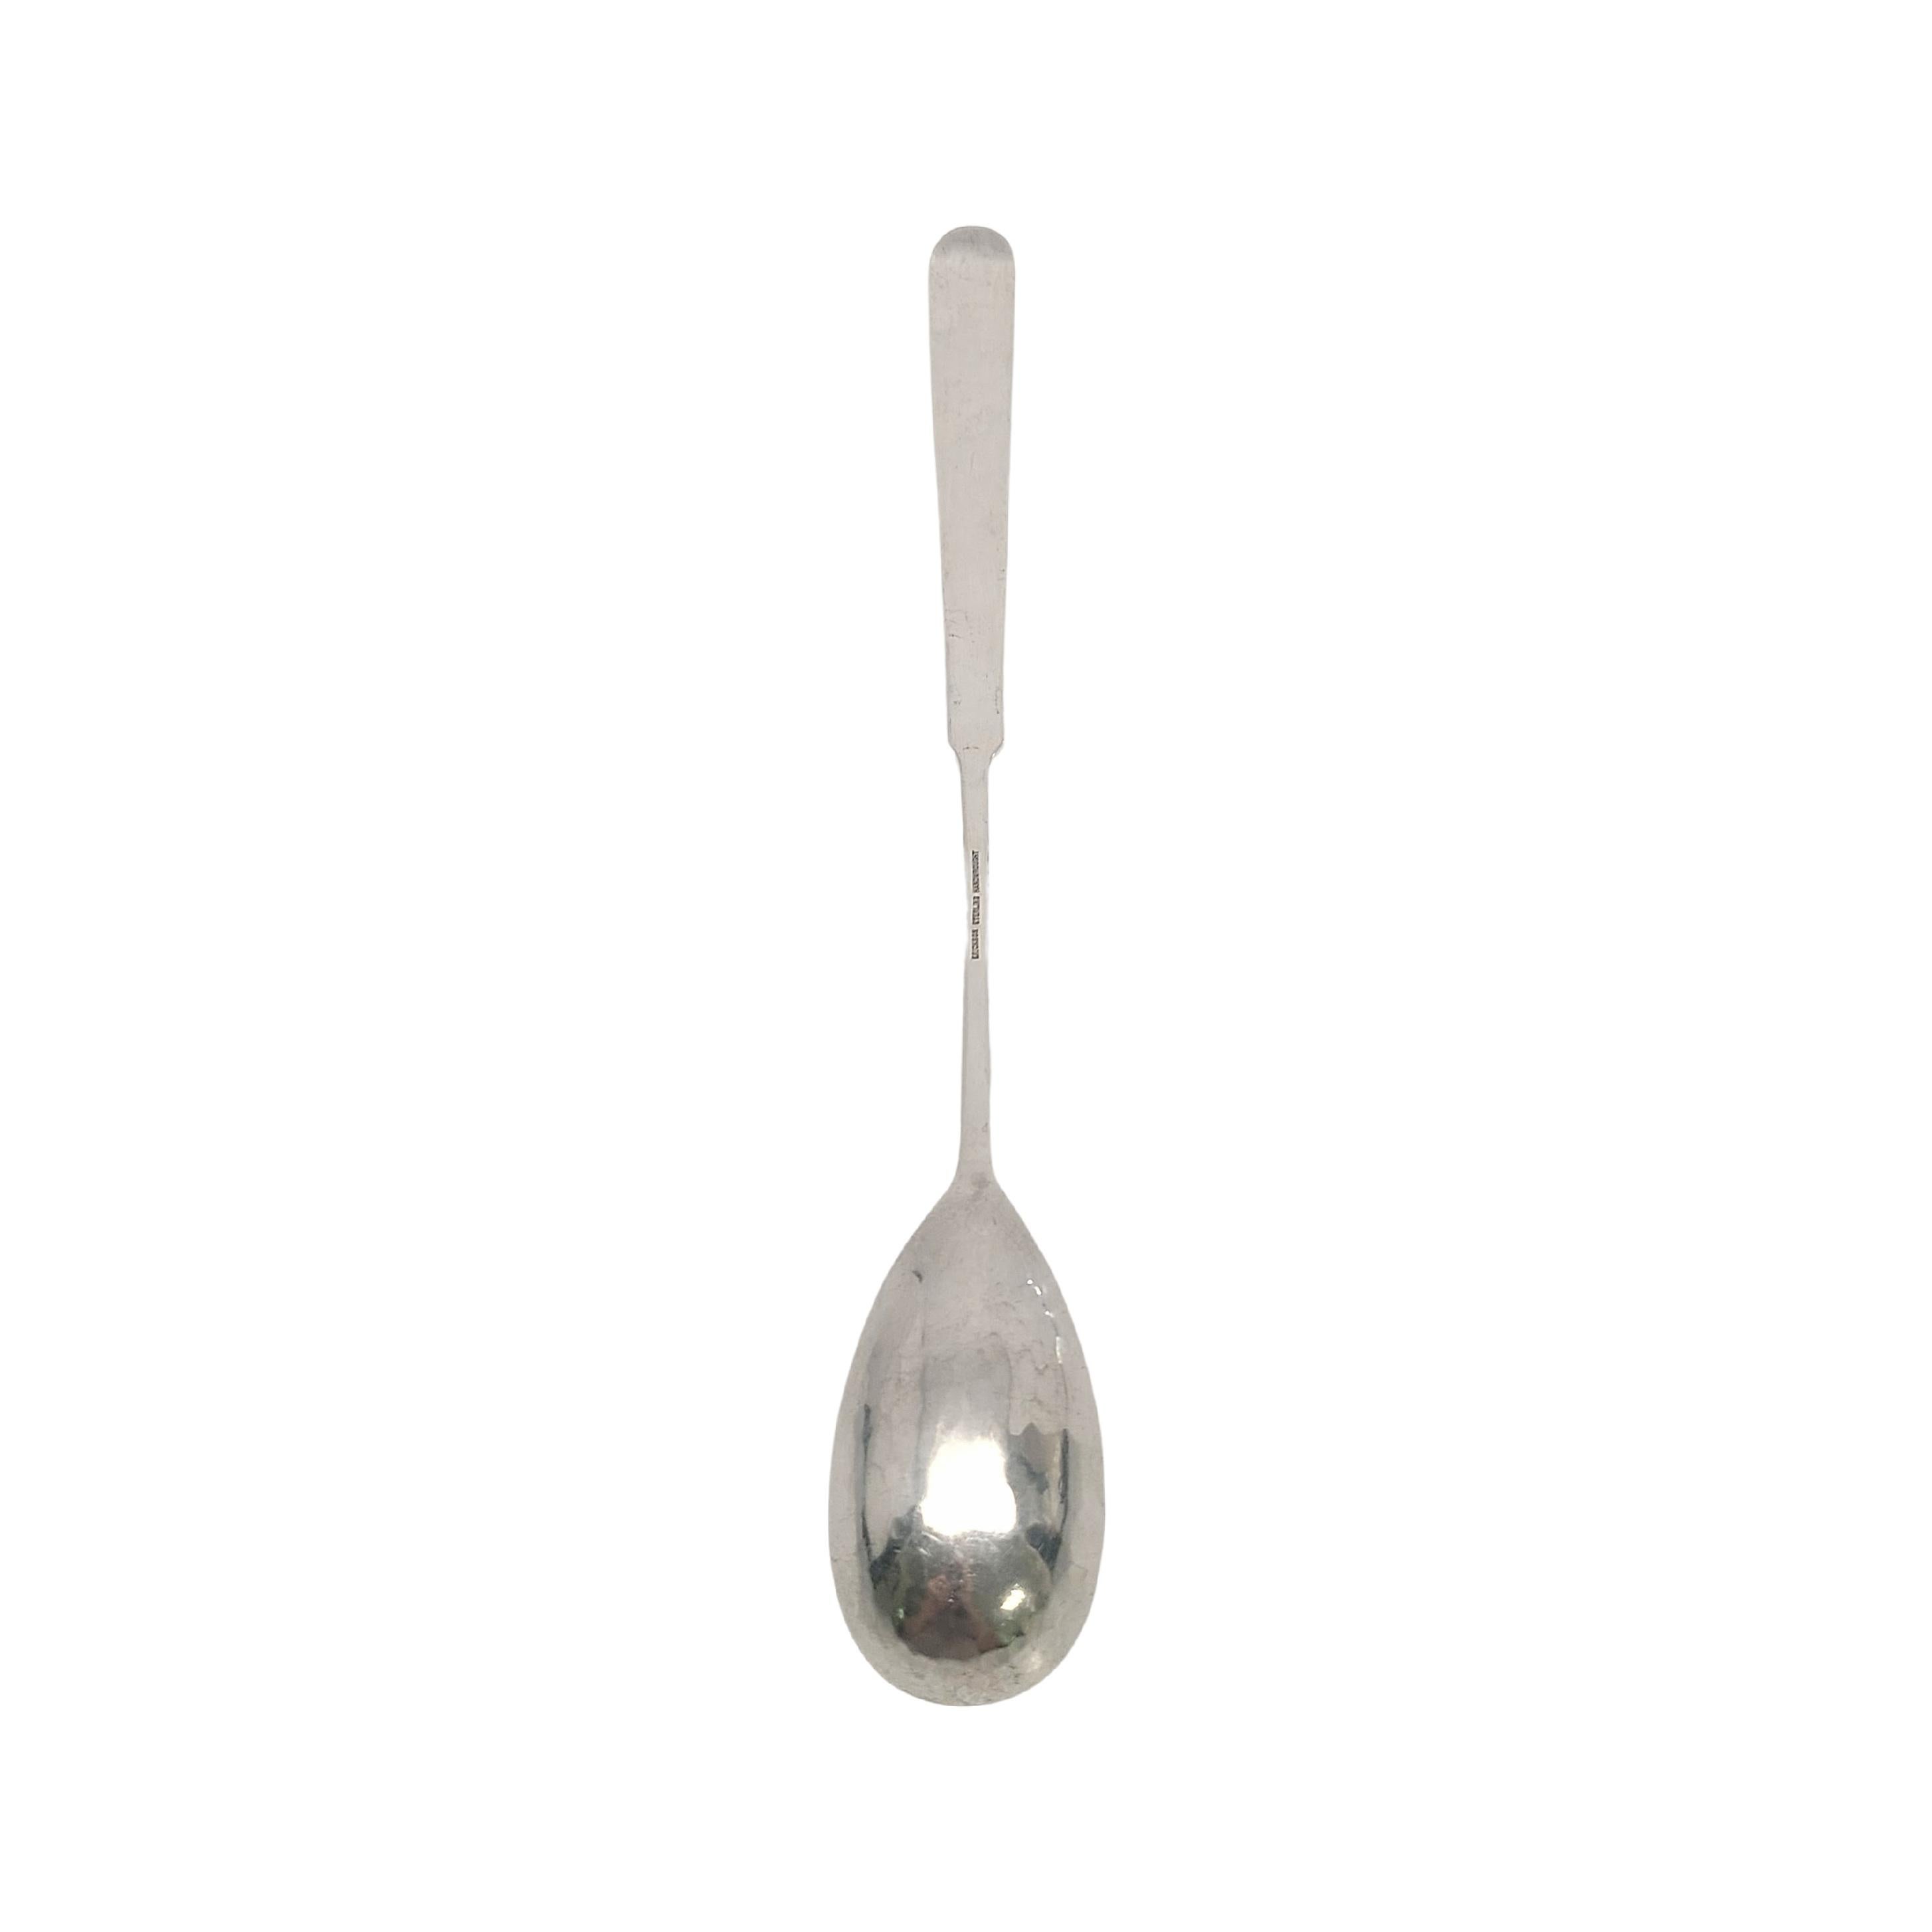 Sterling silver pitcher spoon by George Erickson in the Chino.

No monogram

A beautiful, long  Arts and Crafts style spoon featuring a simple design with a classic, timeless appeal.

Measures approx 12 1/2